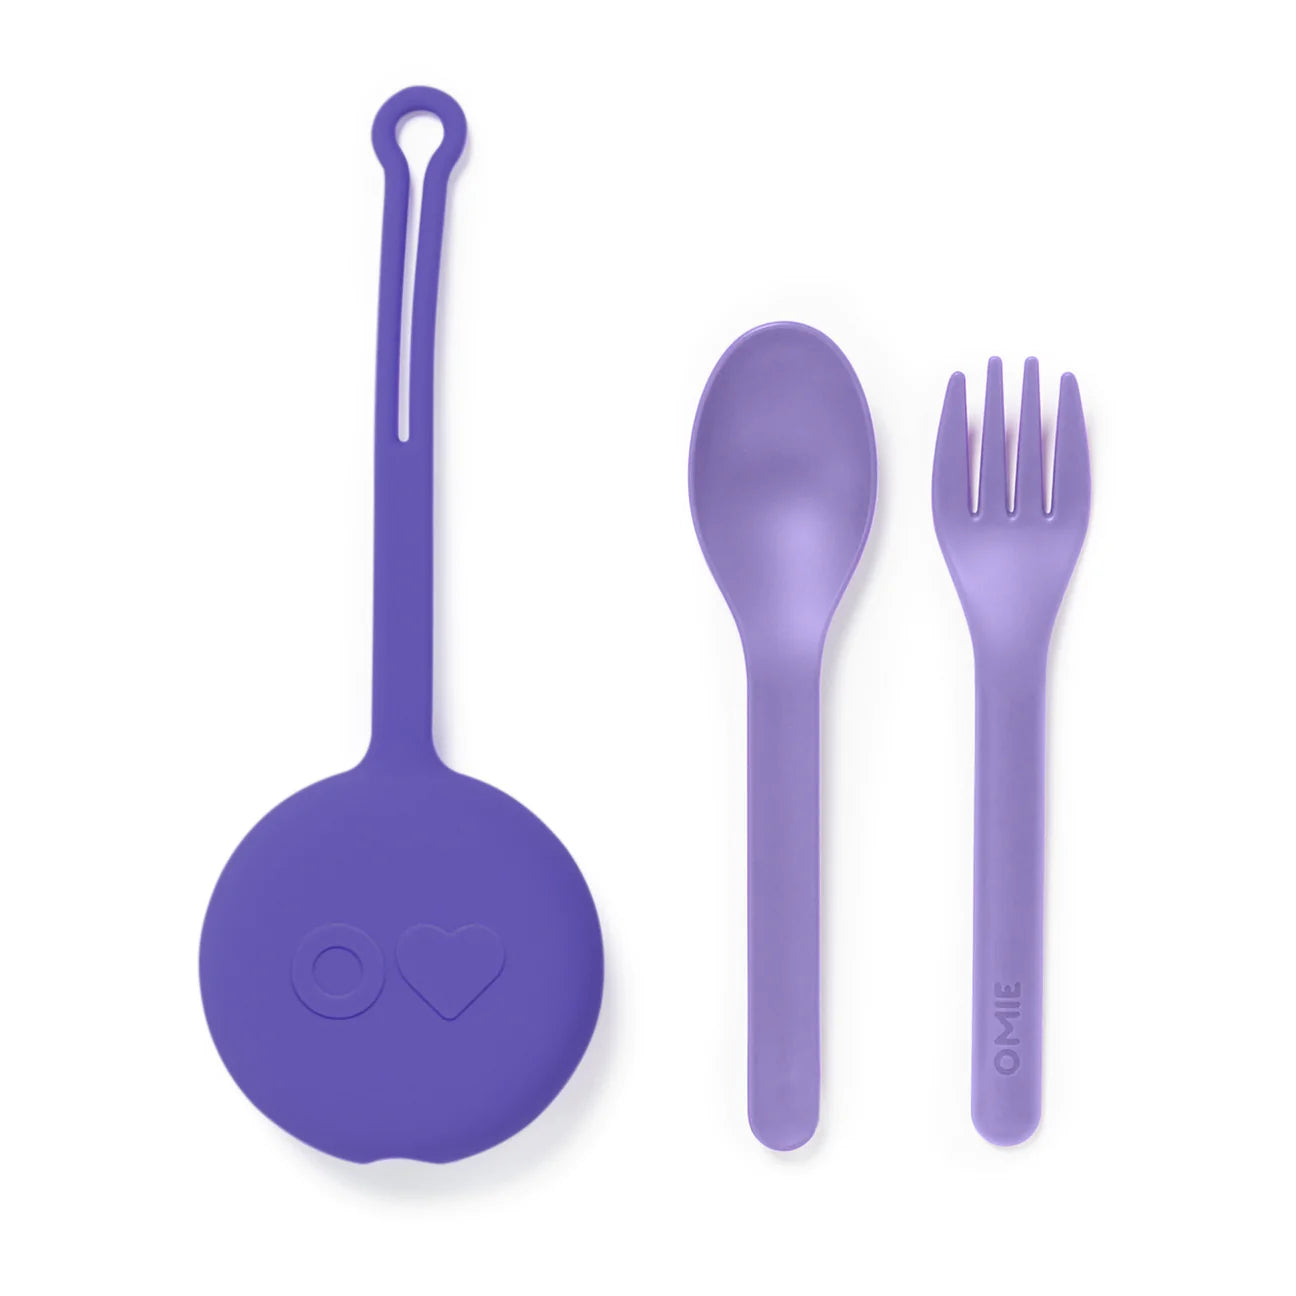 OmiePod hanger - cover with cutlery for lunchbox